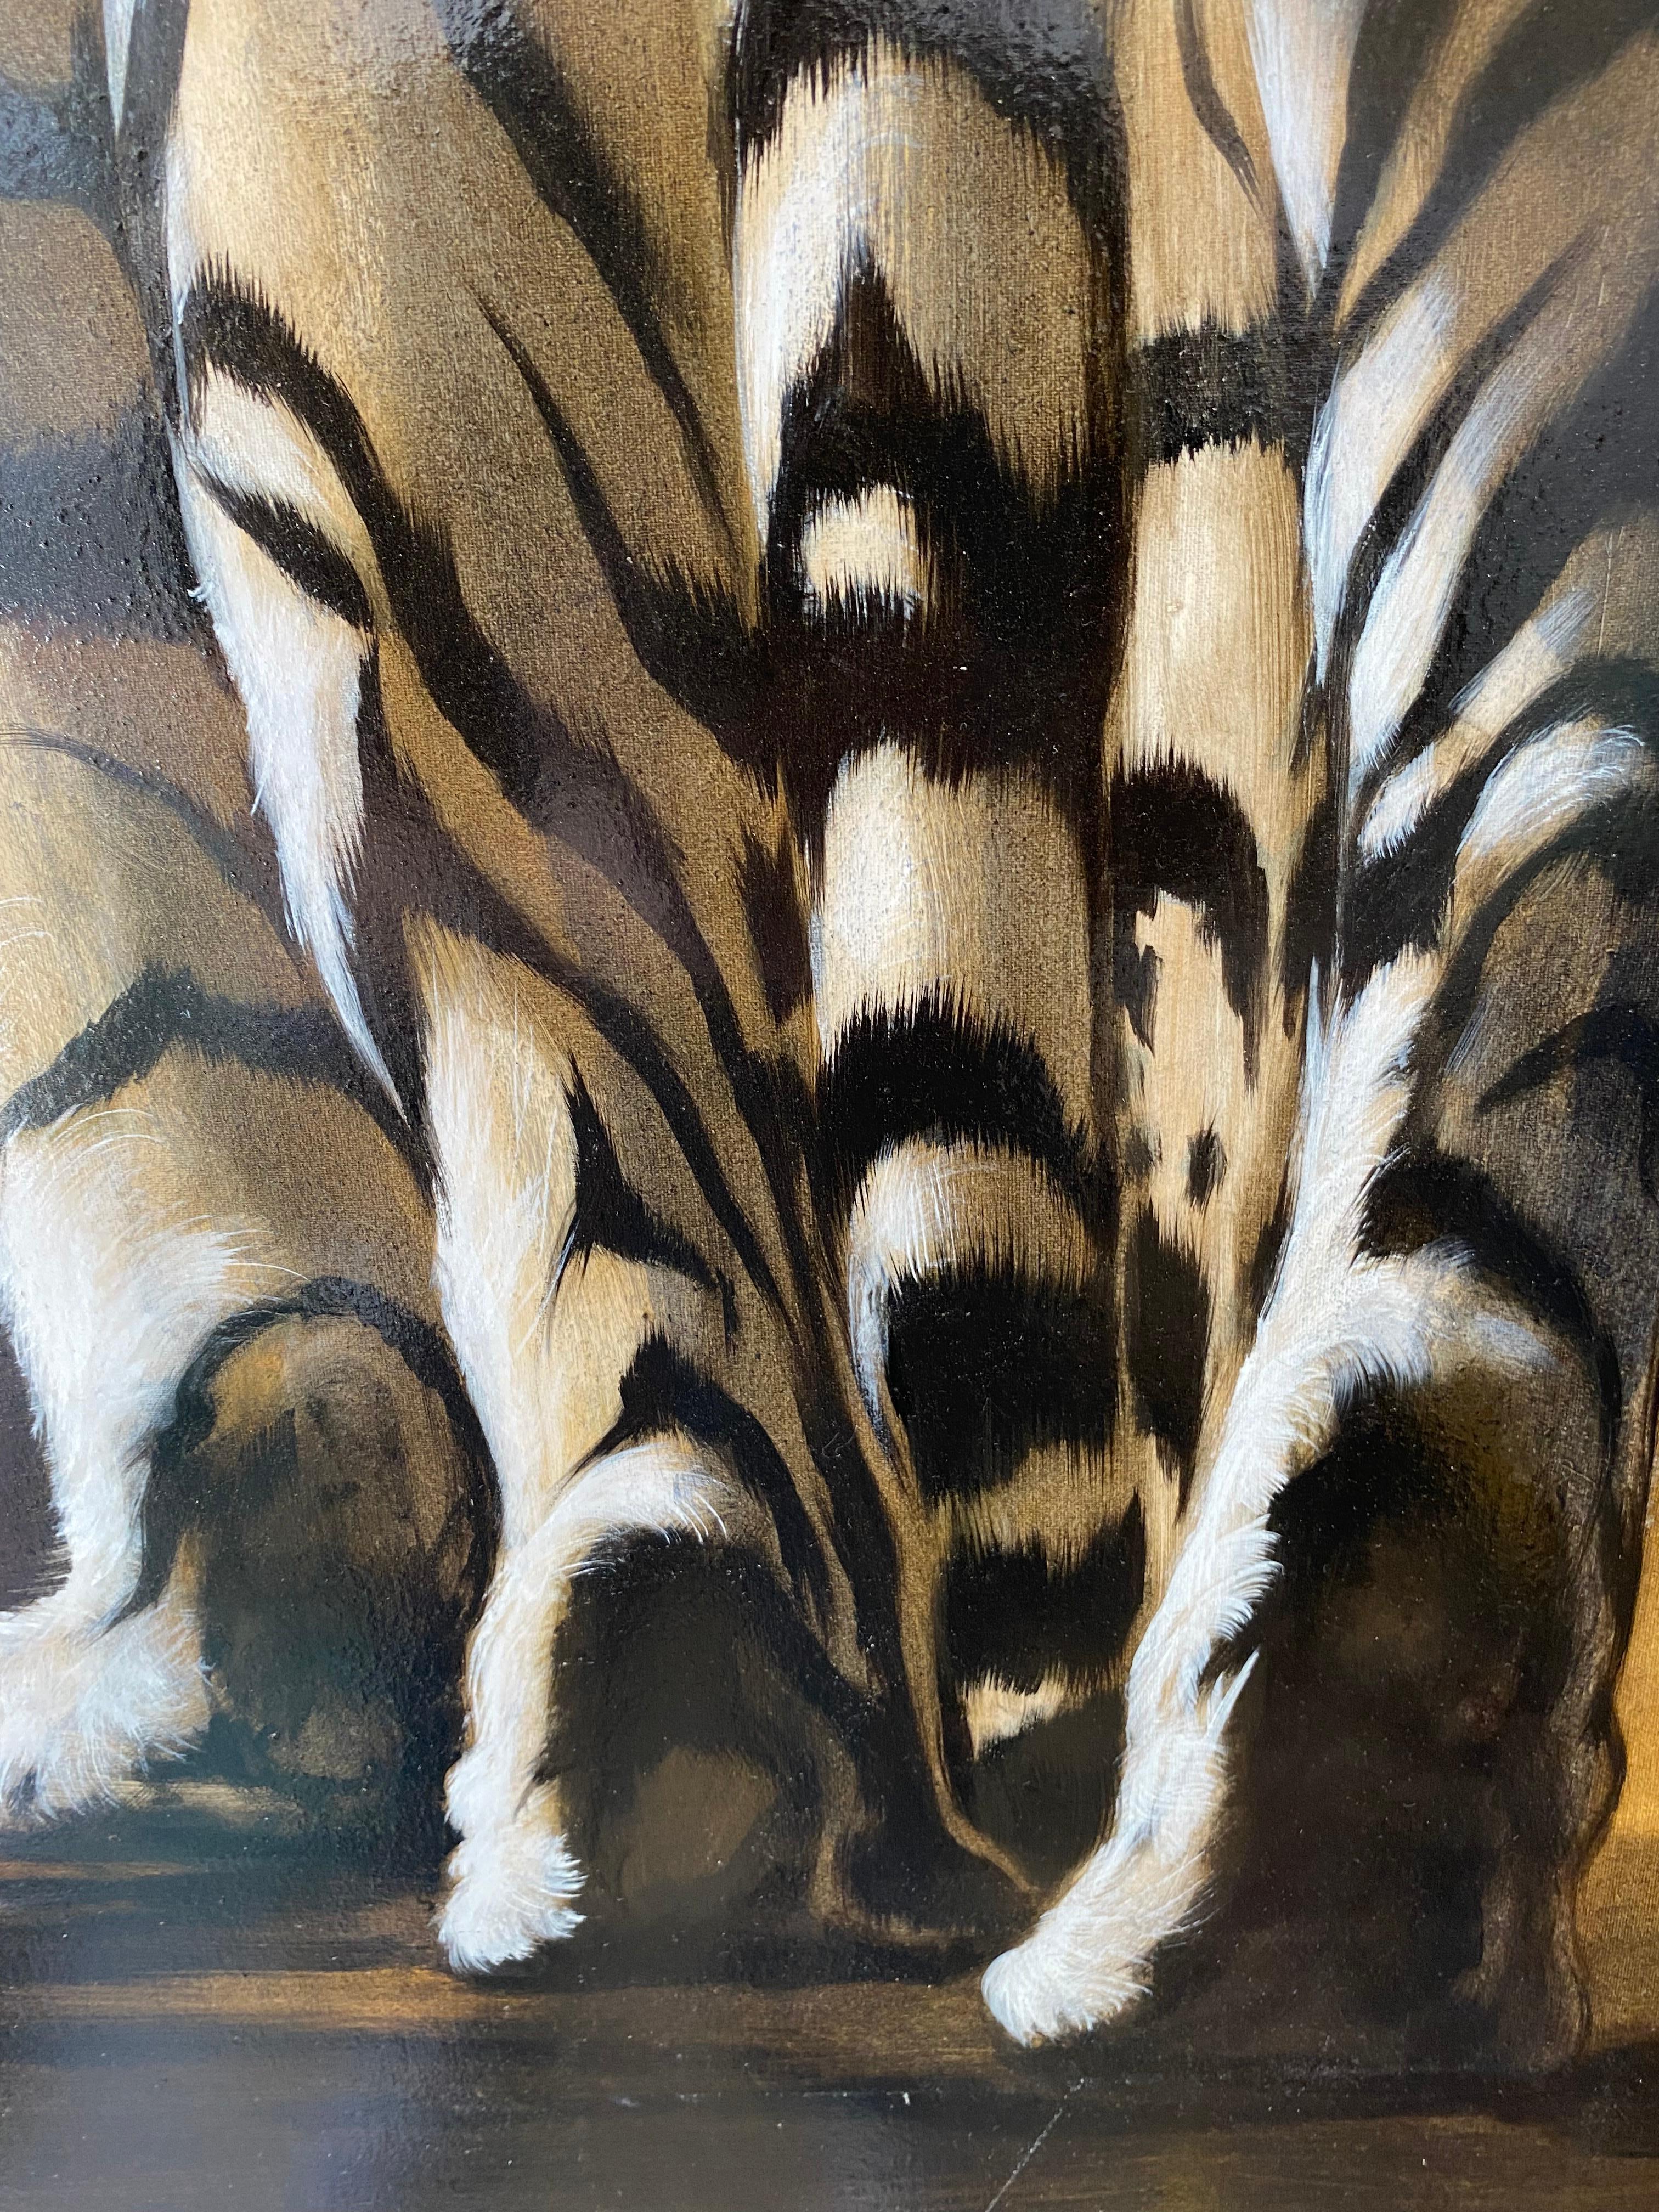 André Ferrand - The Tiger

Oil on canvas
2010
Dimensions : 121 x 94
1900
